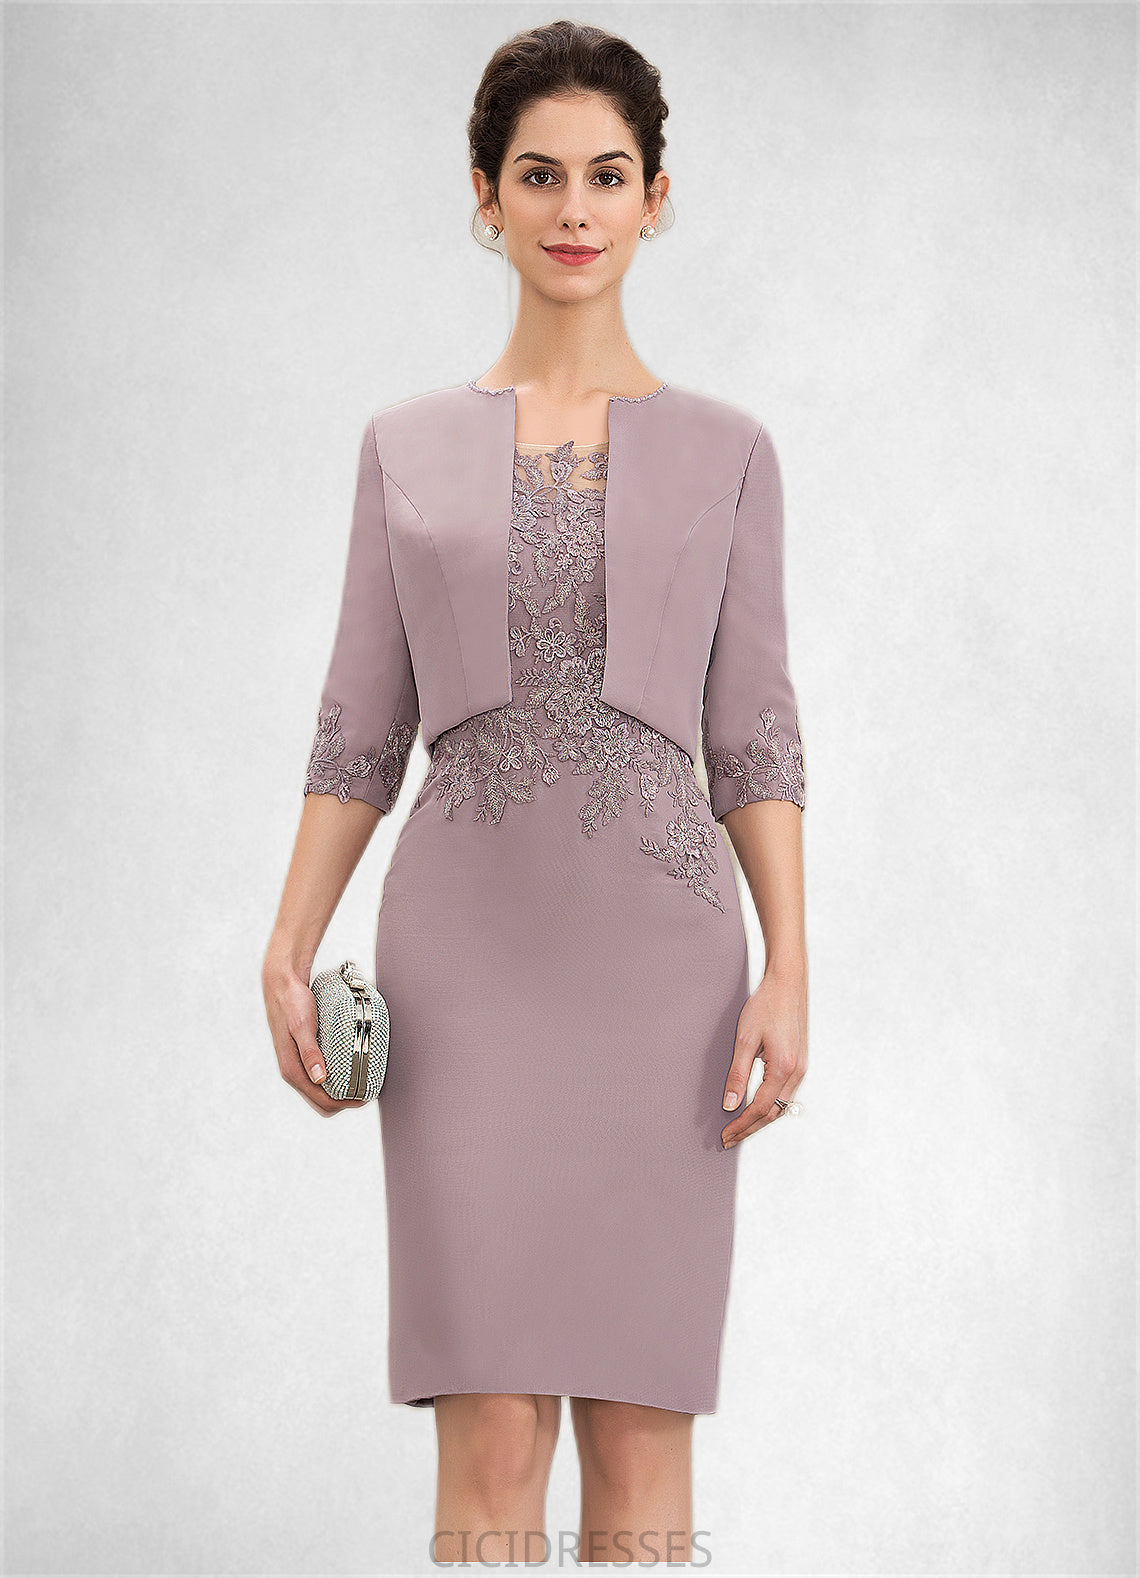 Annie Sheath/Column Scoop Neck Knee-Length Chiffon Lace Mother of the Bride Dress CIC8126P0014624